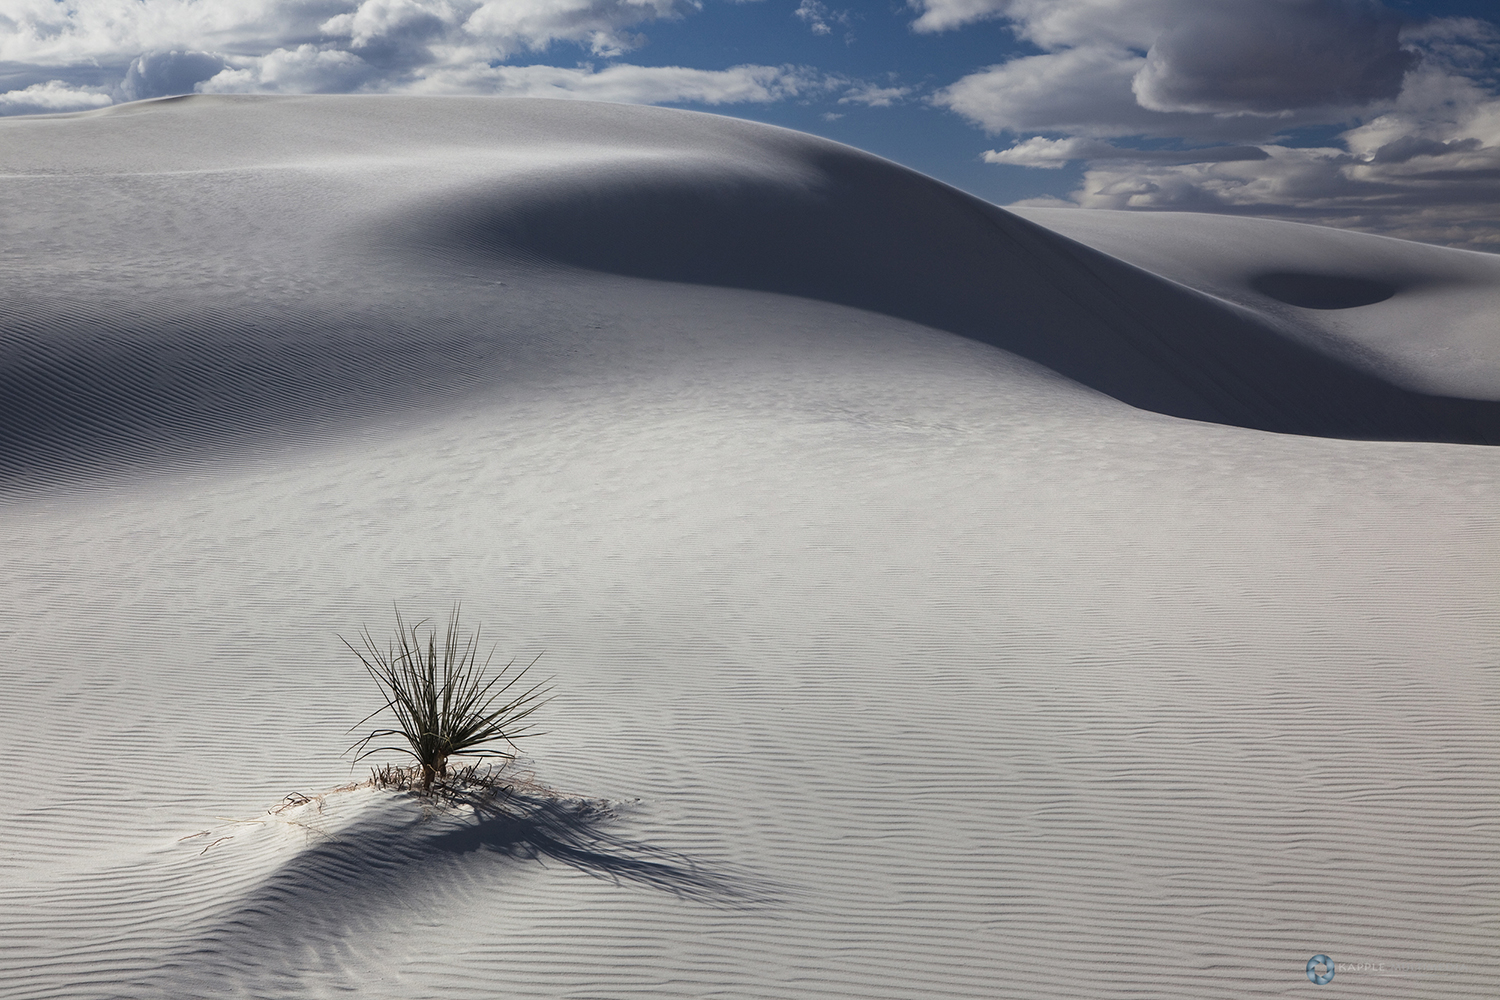 White Gypsum sand dunes in a desert with mountains, White Sands National Monument, New Mexico, USA